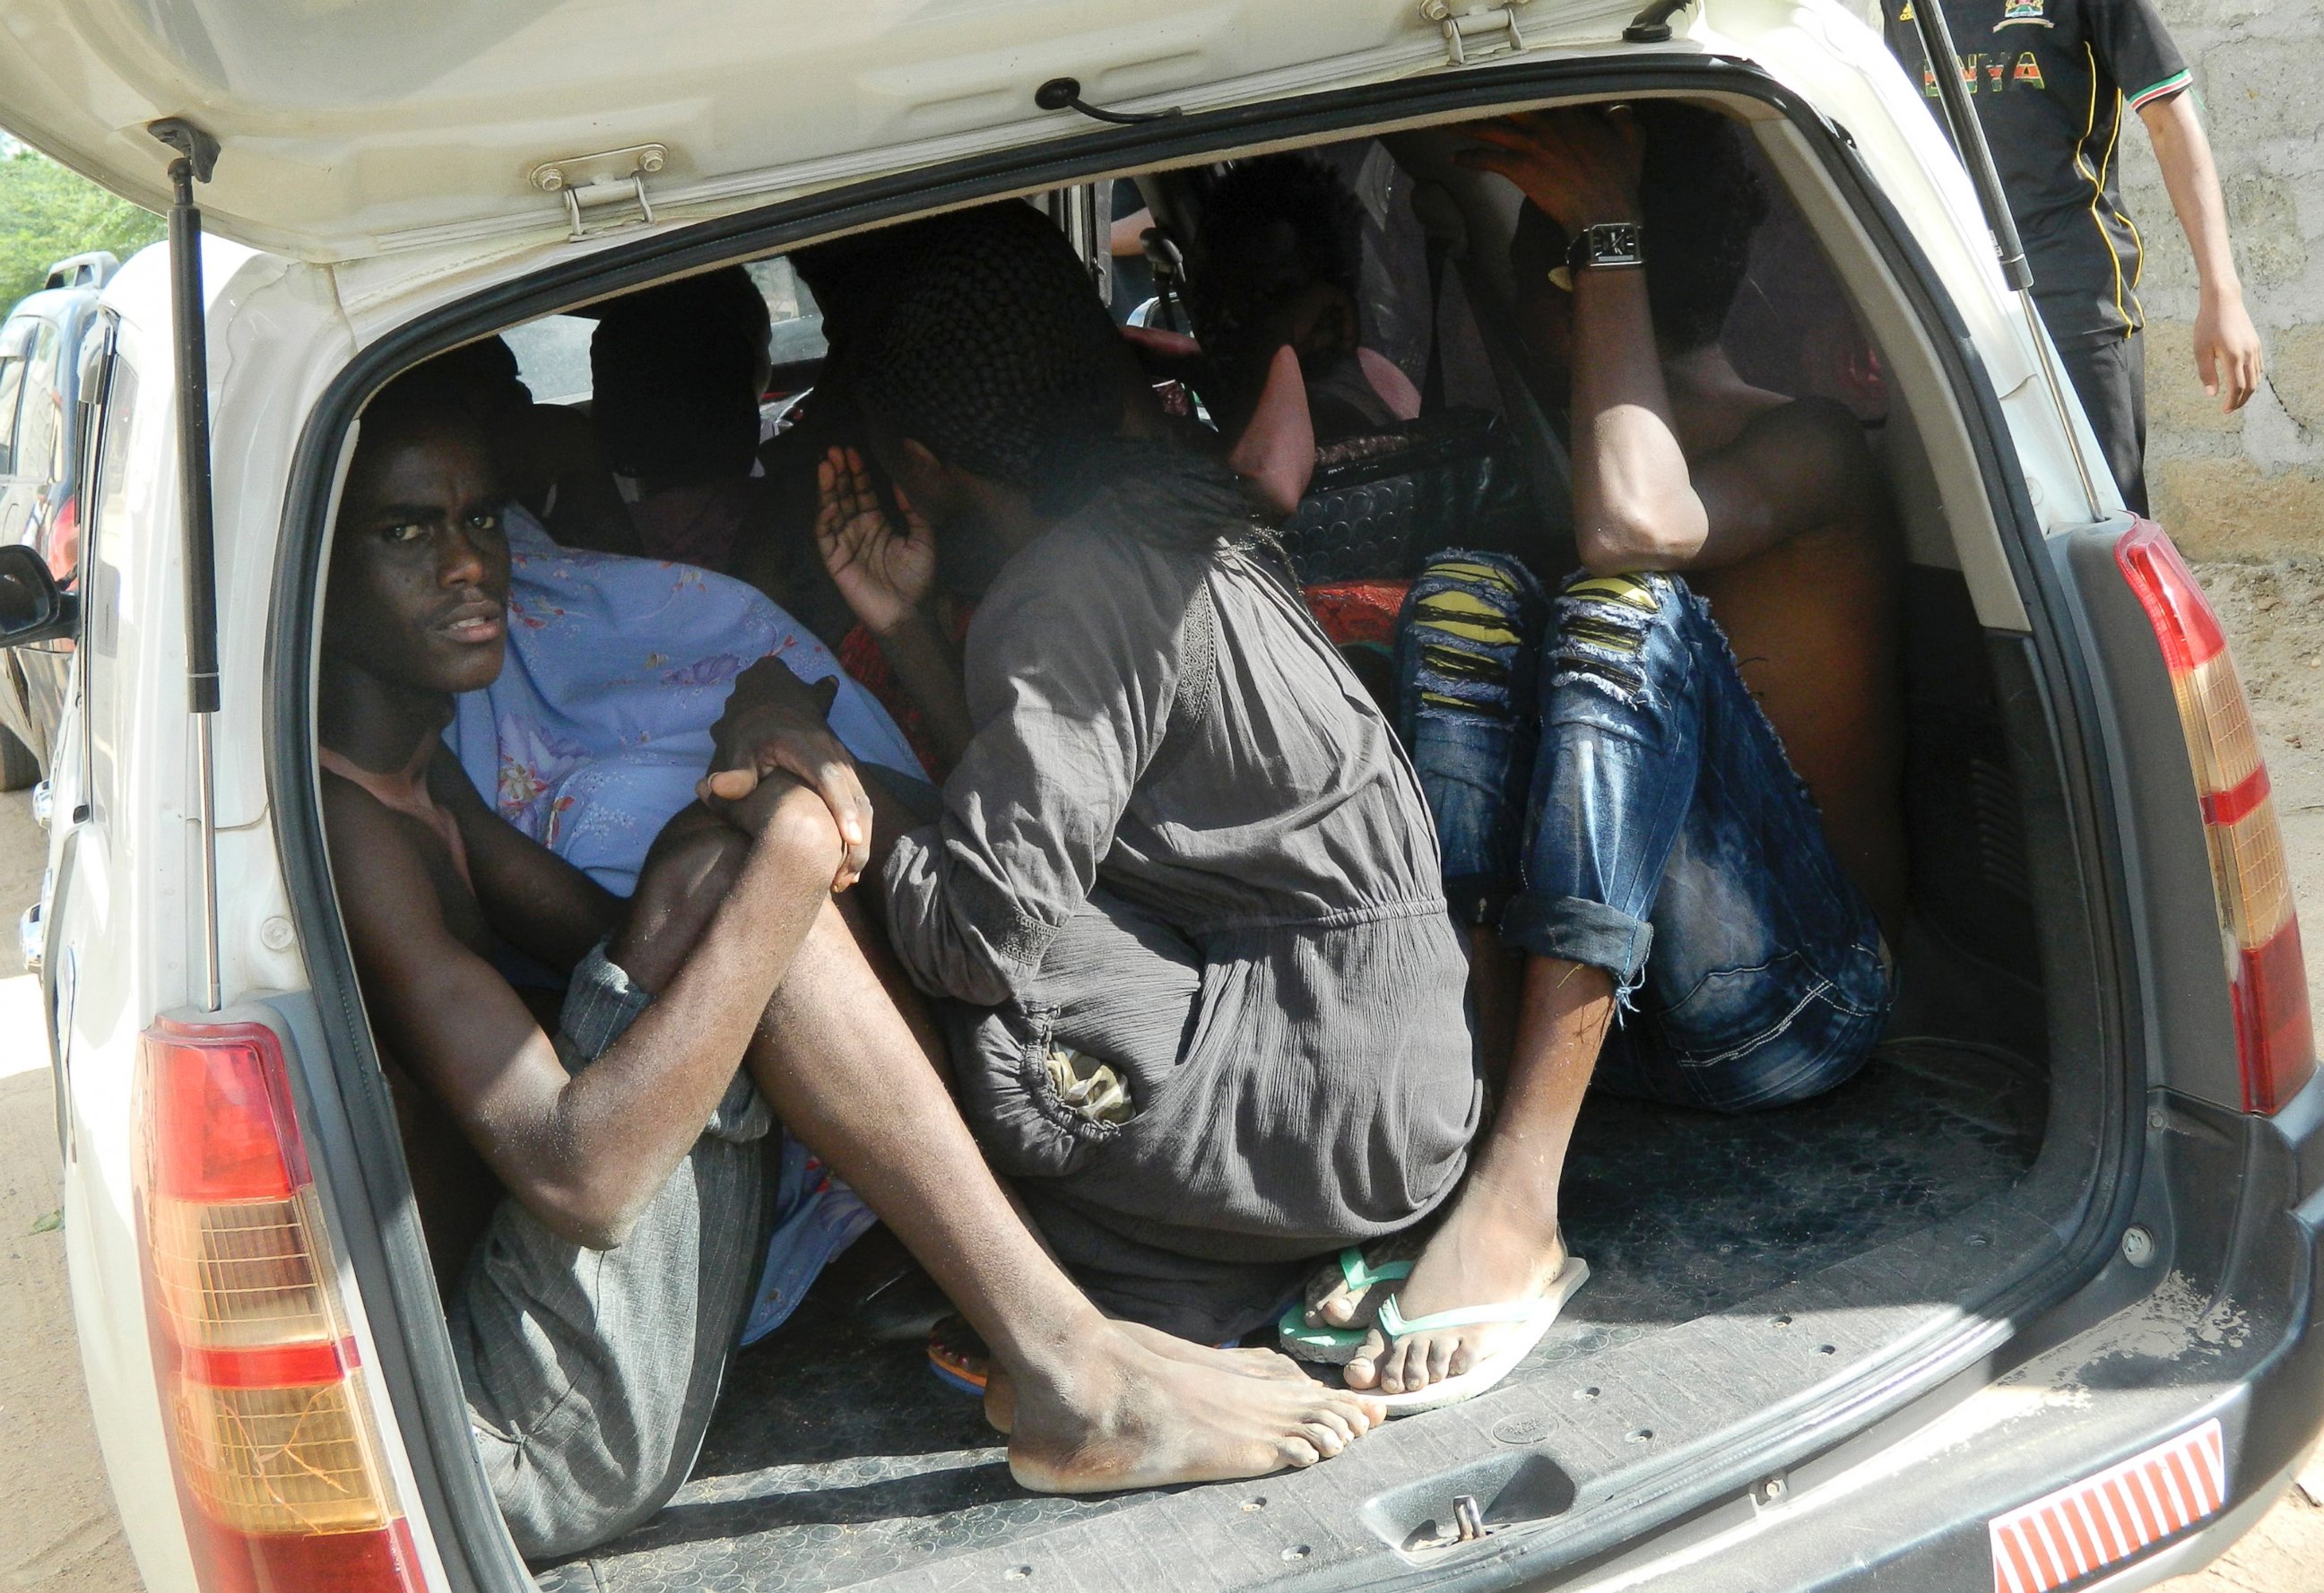 PHOTO: Students of the Garissa University College take shelter in a vehicle after fleeing from an attack by gunmen in Garissa, Kenya, April 2, 2015.